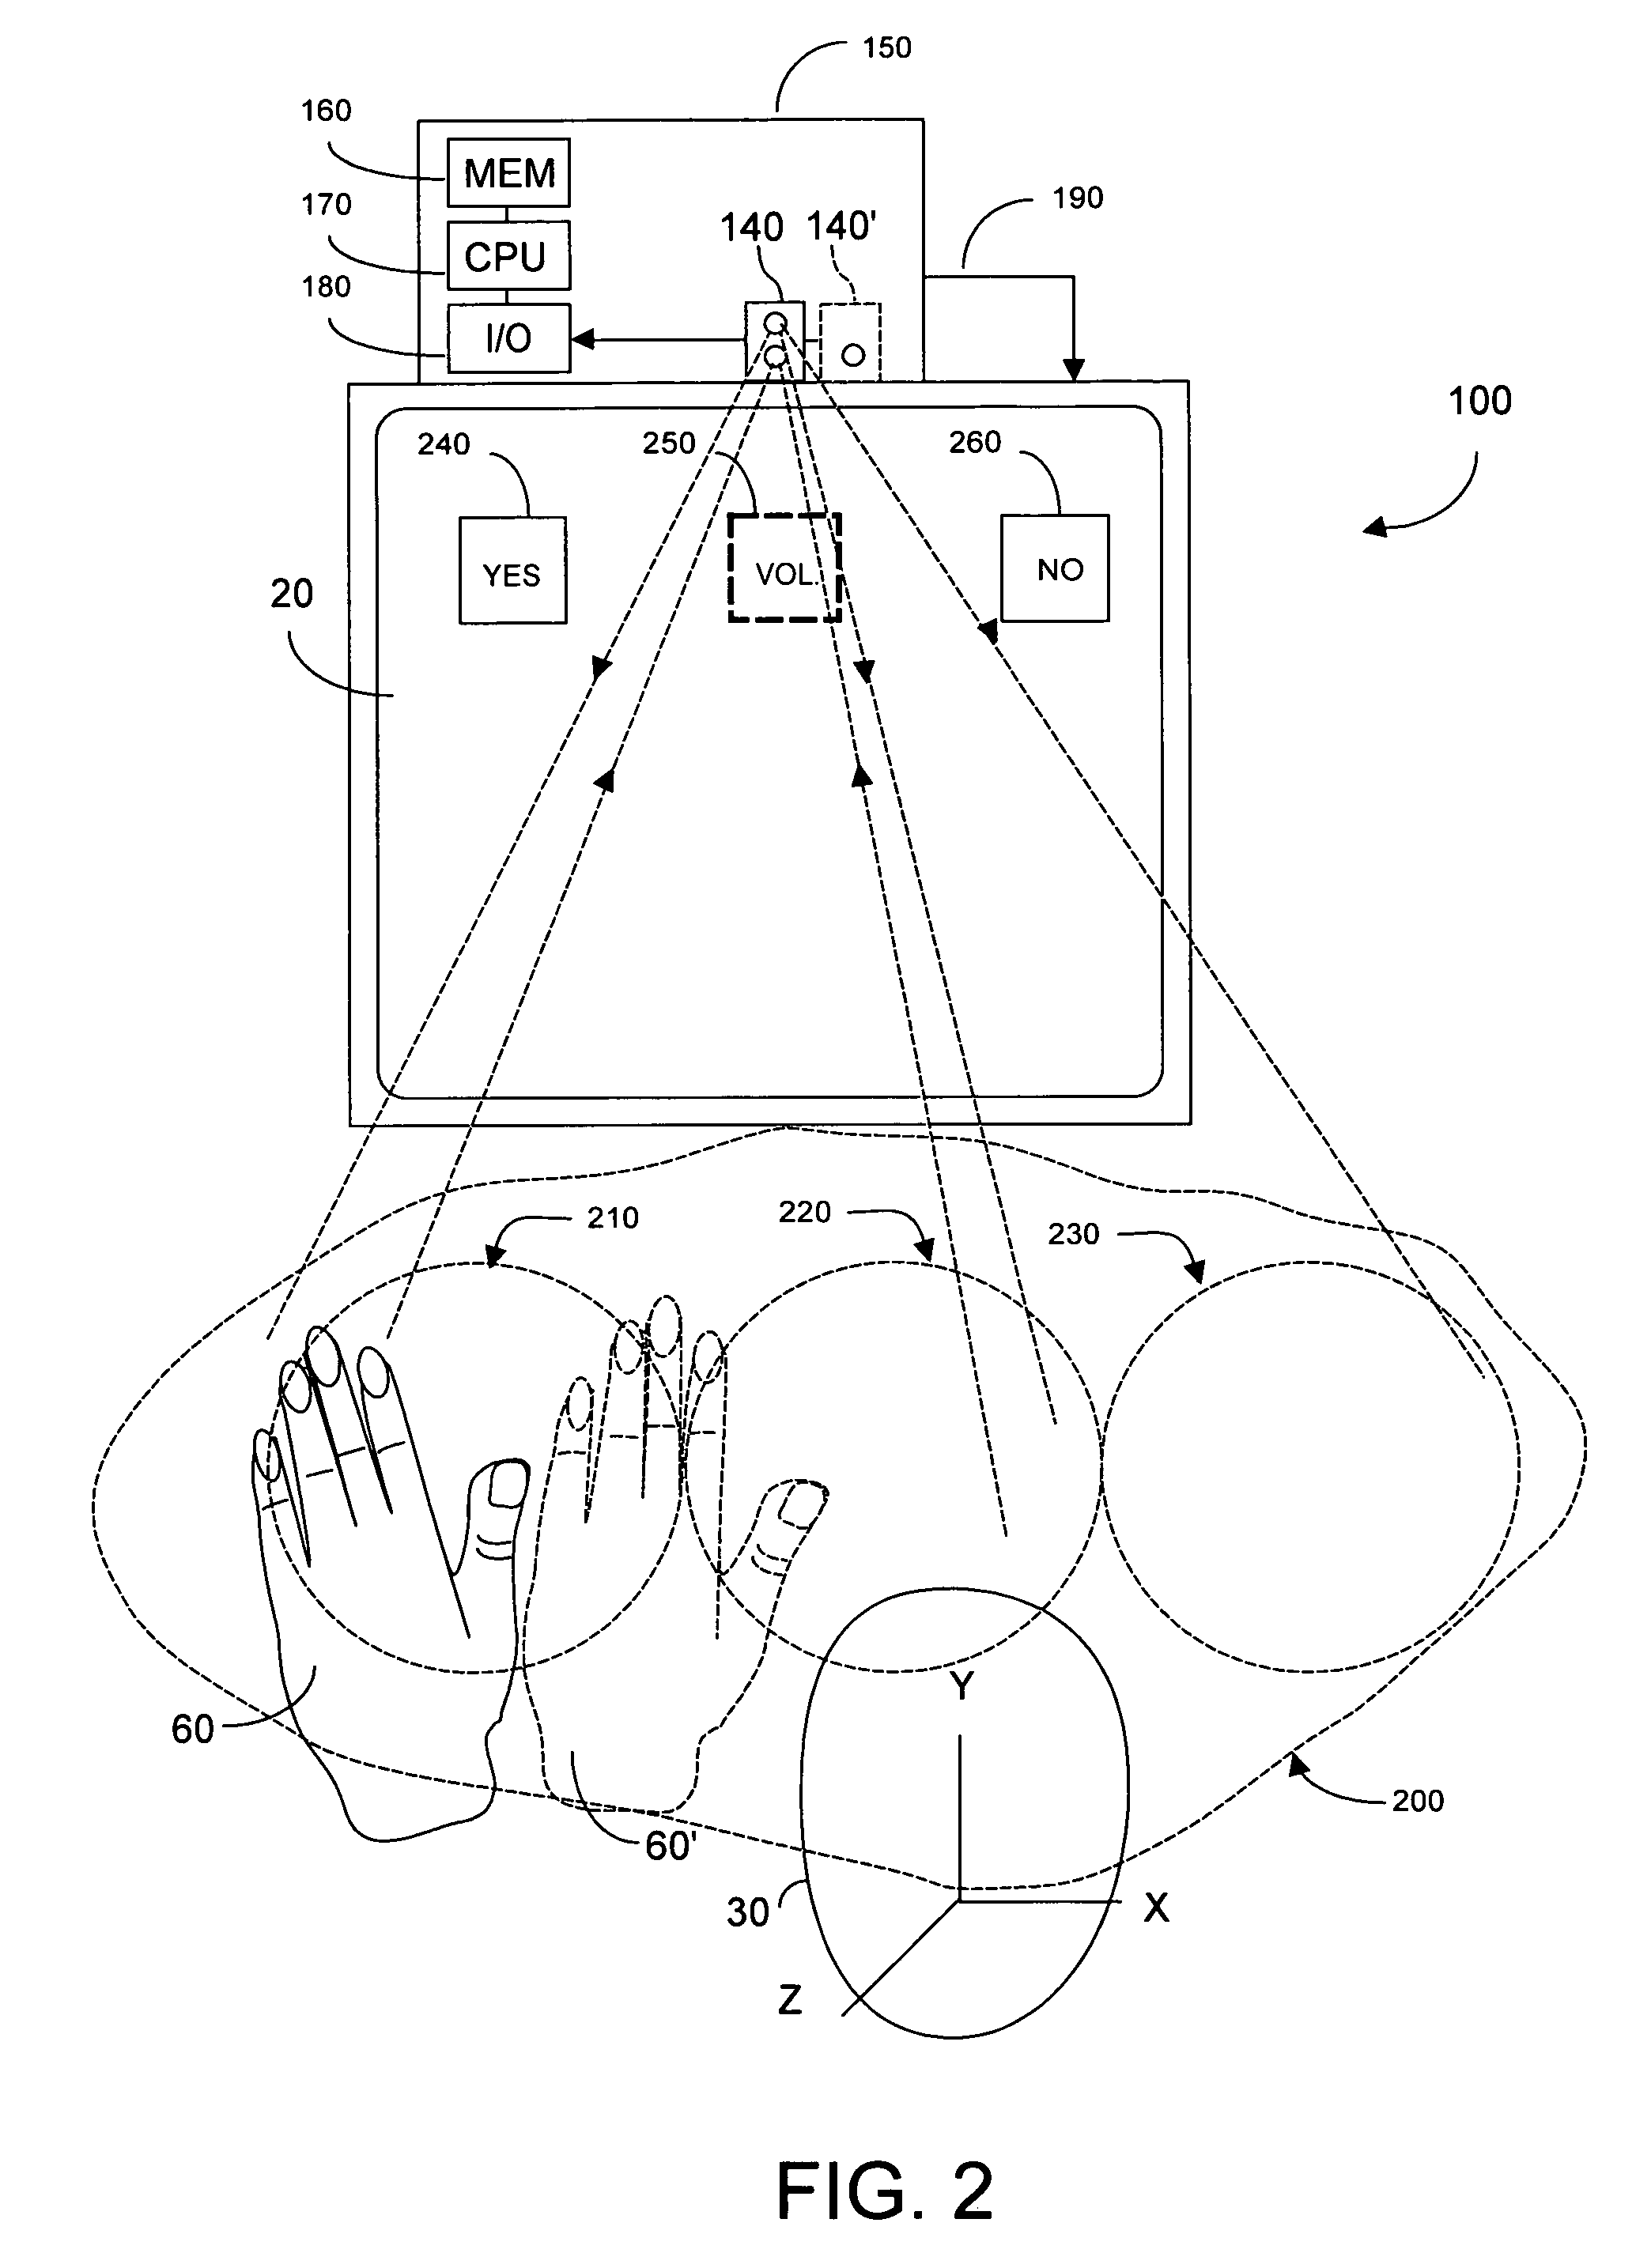 Method and system implementing user-centric gesture control